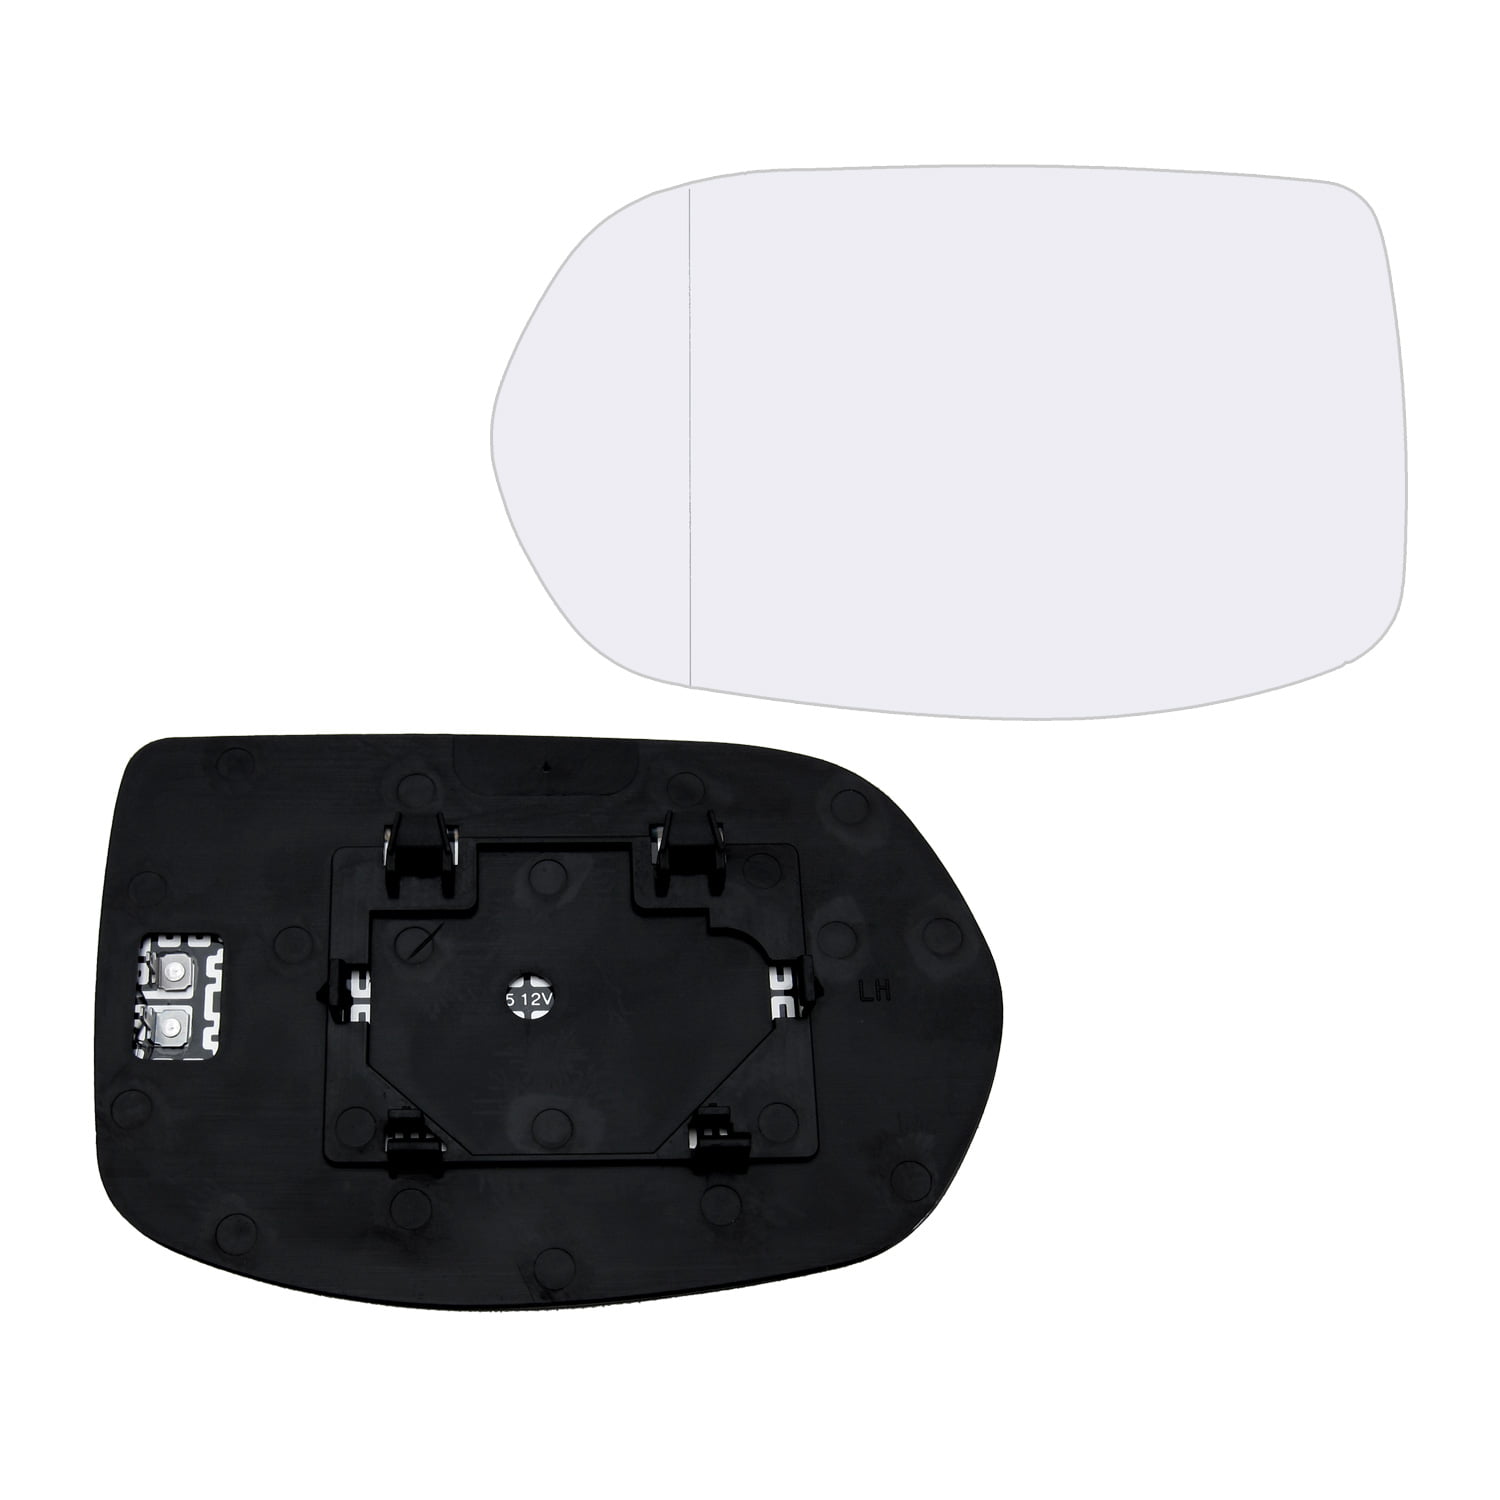 New Replacement Driver Side Mirror Heated Glass W Backing Compatible With Honda CR-V 2012-2016 Honda HR-V 2016-2019 Sold By Rugged TUFF